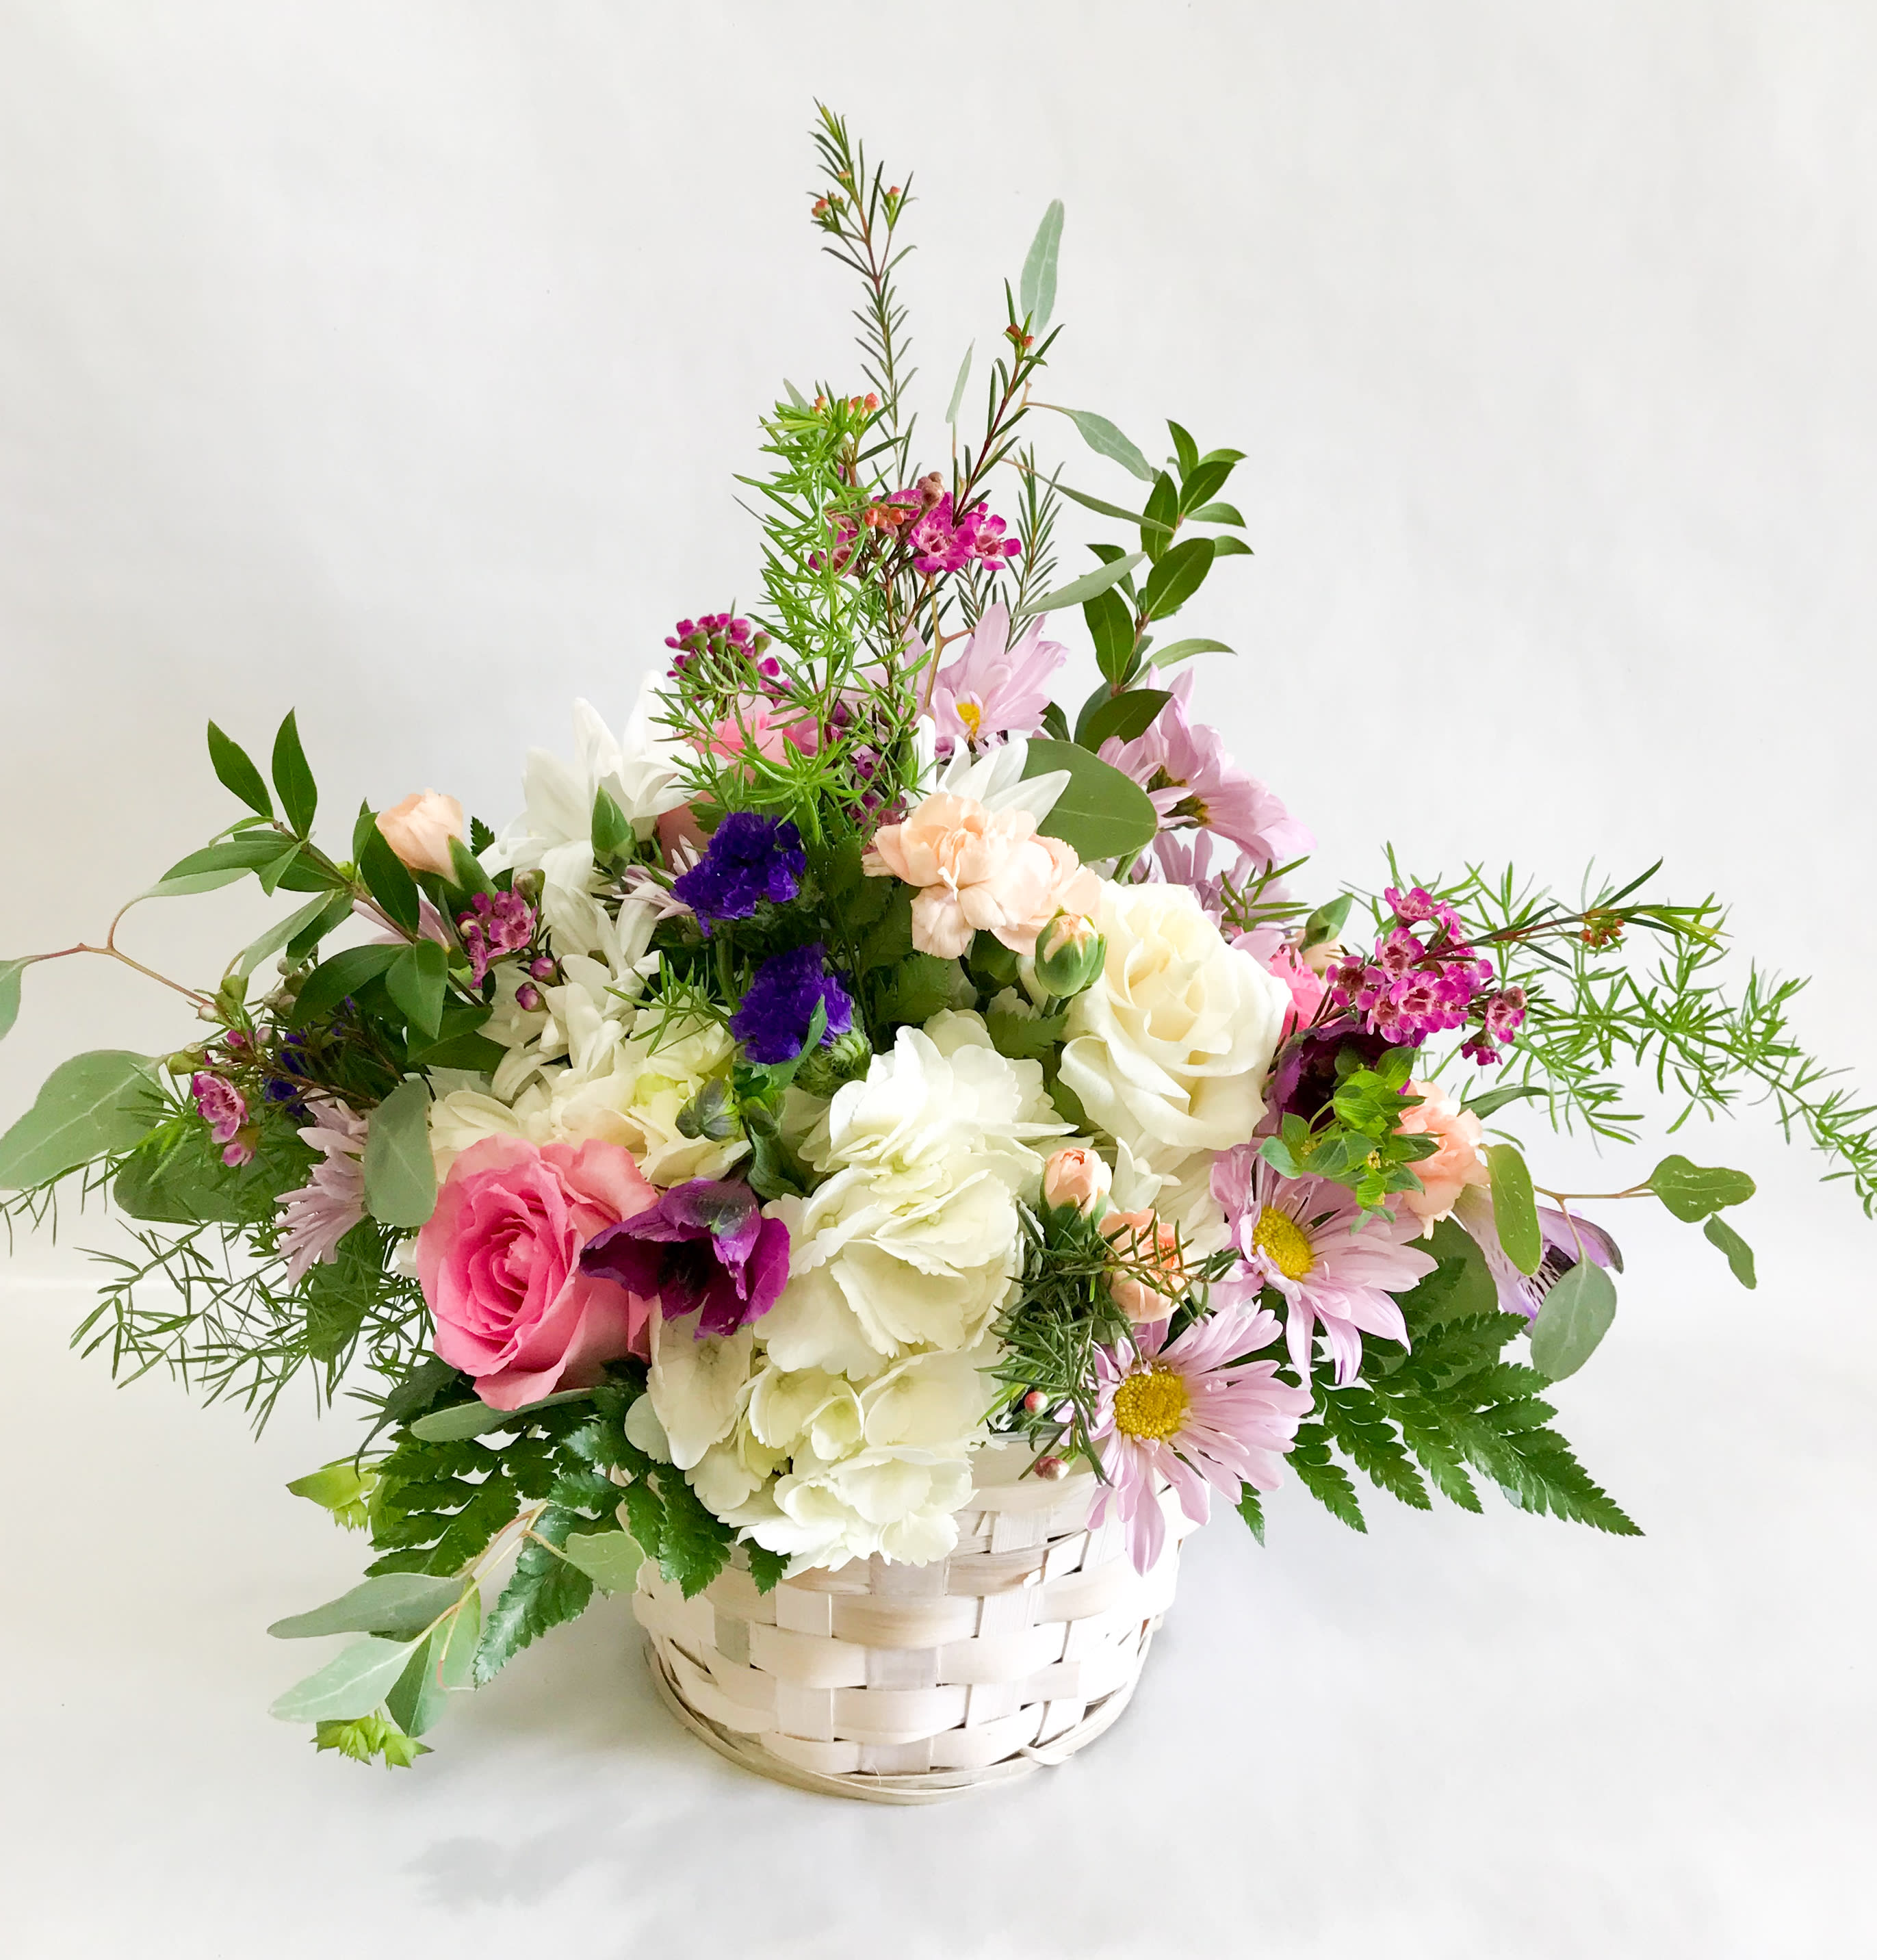 Summer Garden by Barb's Flowers - The bouquet that says it all.  A basket full of a nice mix of flowers.